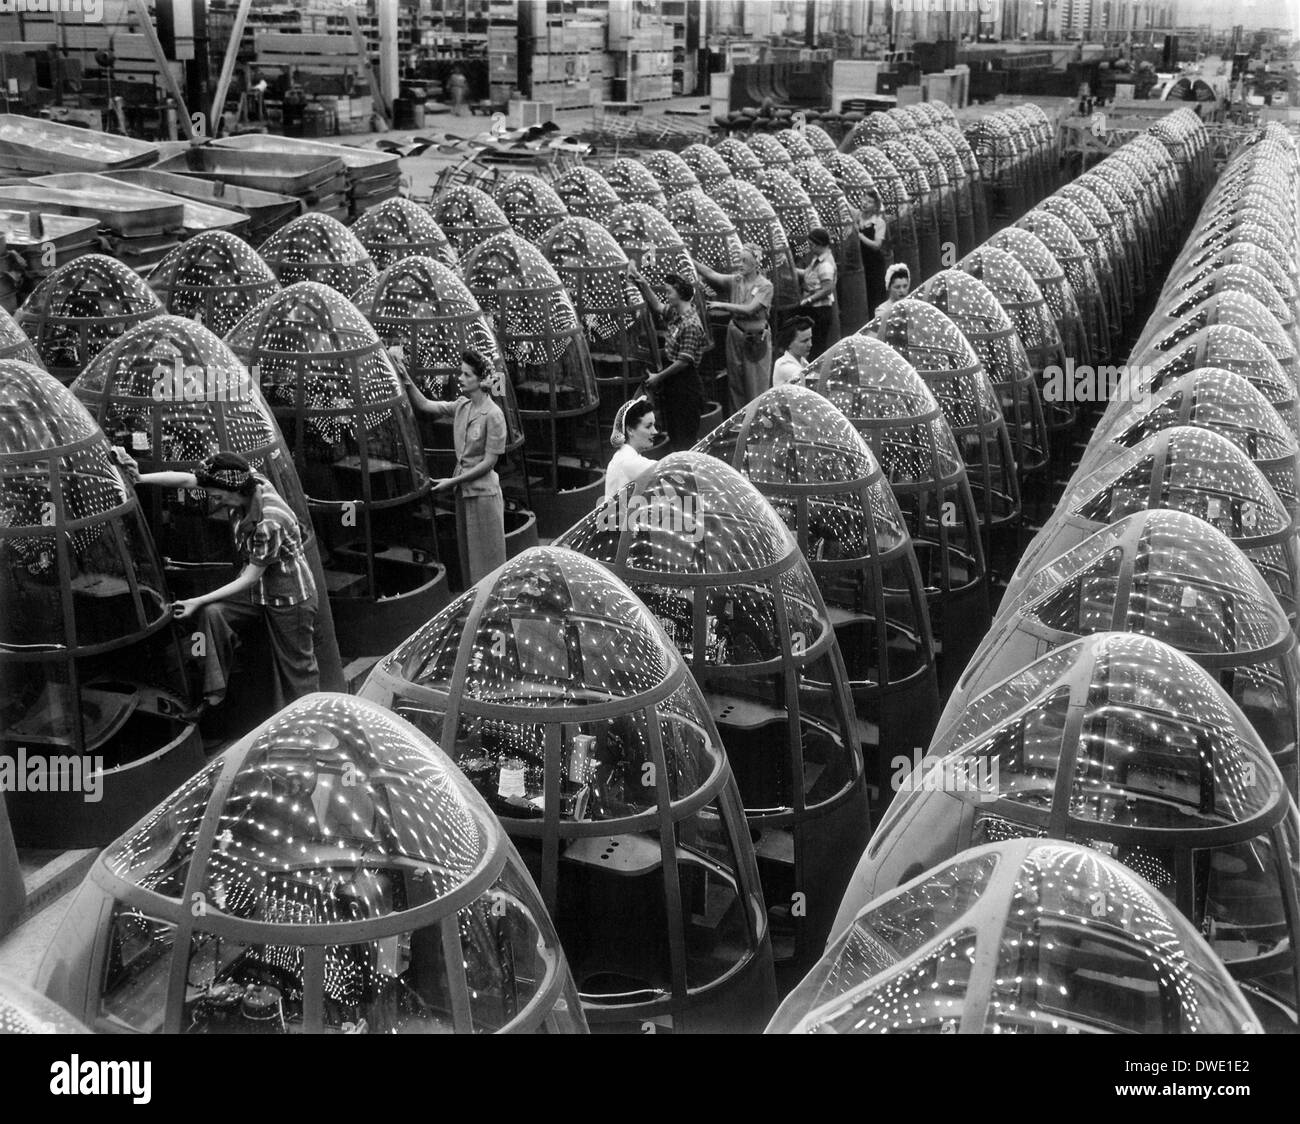 Women workers known as Rosie the Riveters polish the transparent nose cones for A-20 attack bomber aircraft at the Douglas Aircraft factory October 1942 in Long Beach, CA. Stock Photo